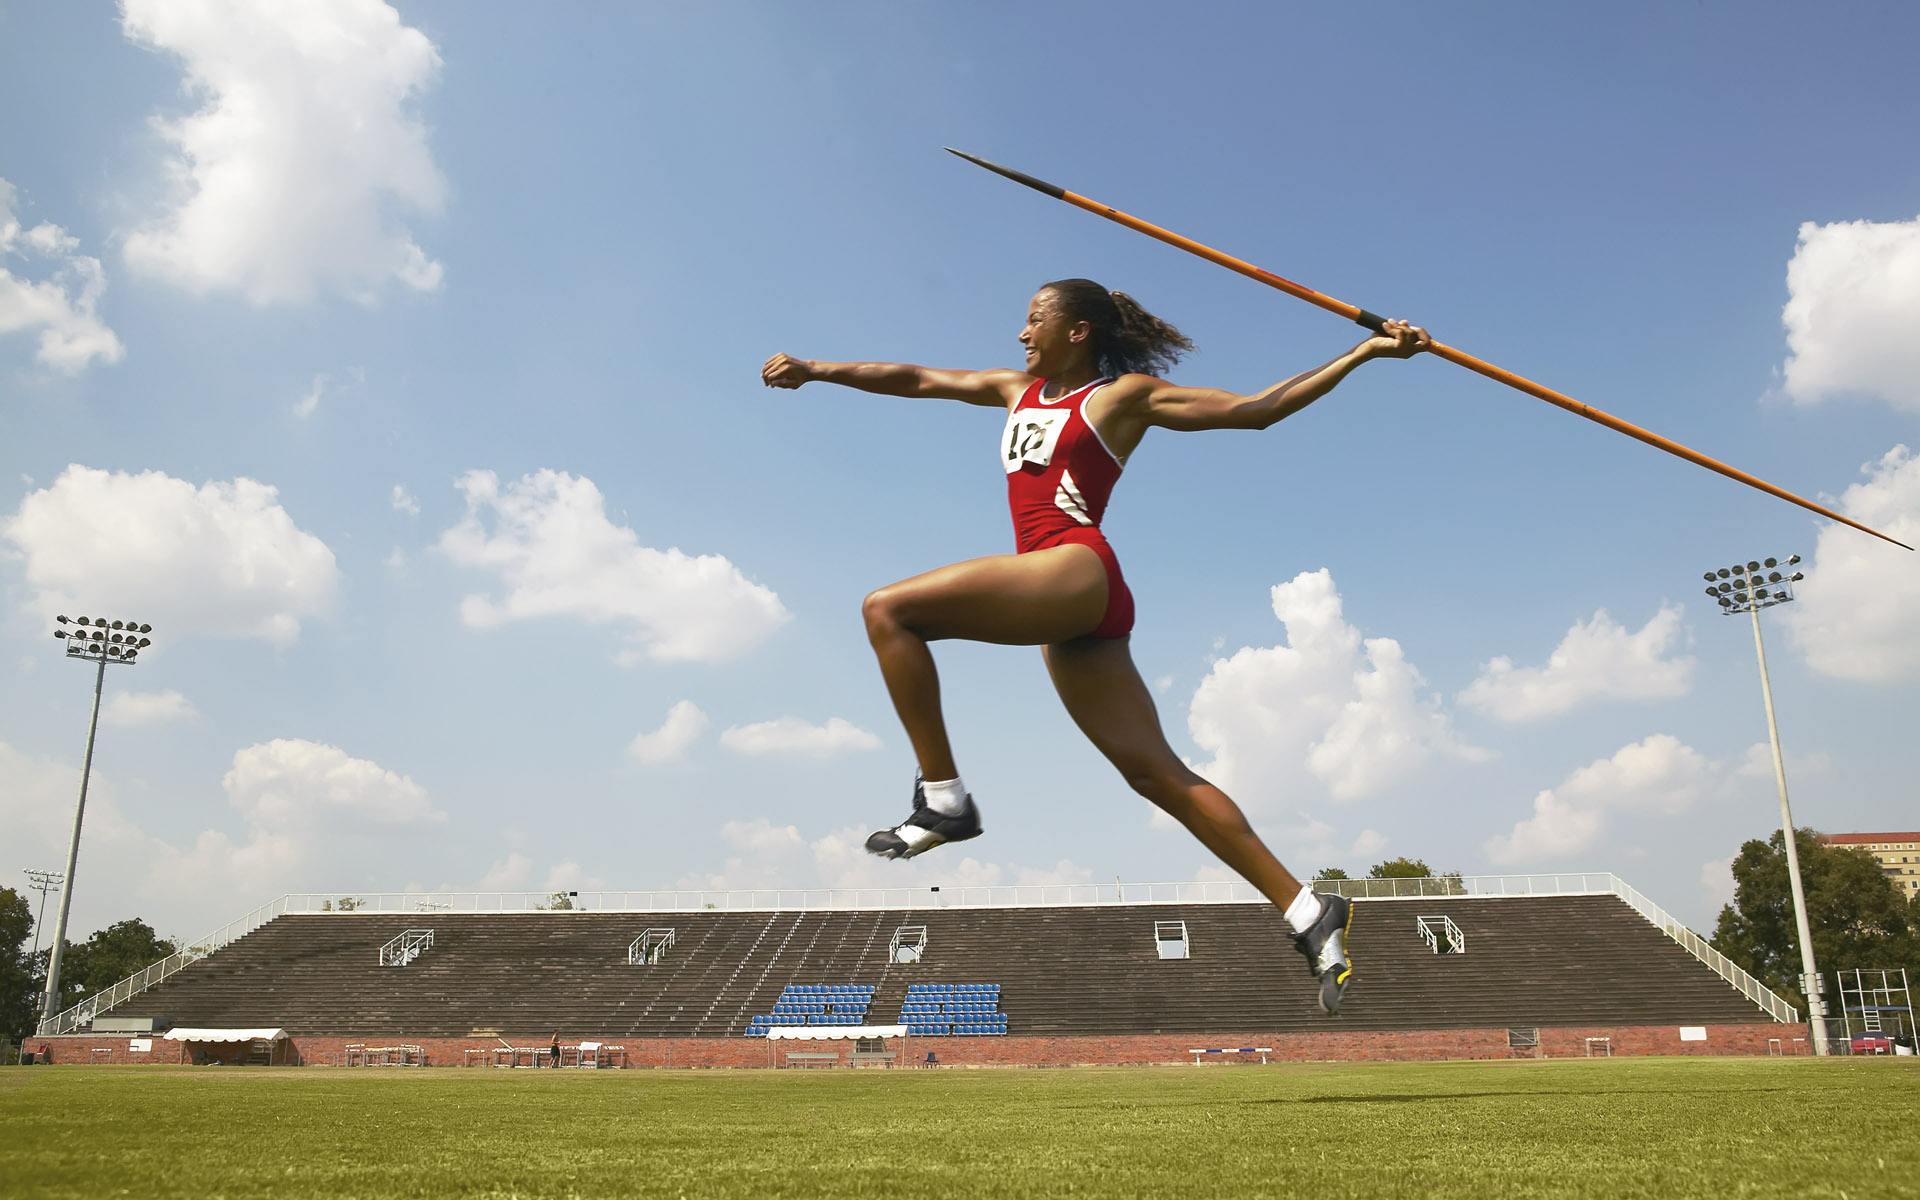 8 Life Lessons To Learn From Remarkable Athletes